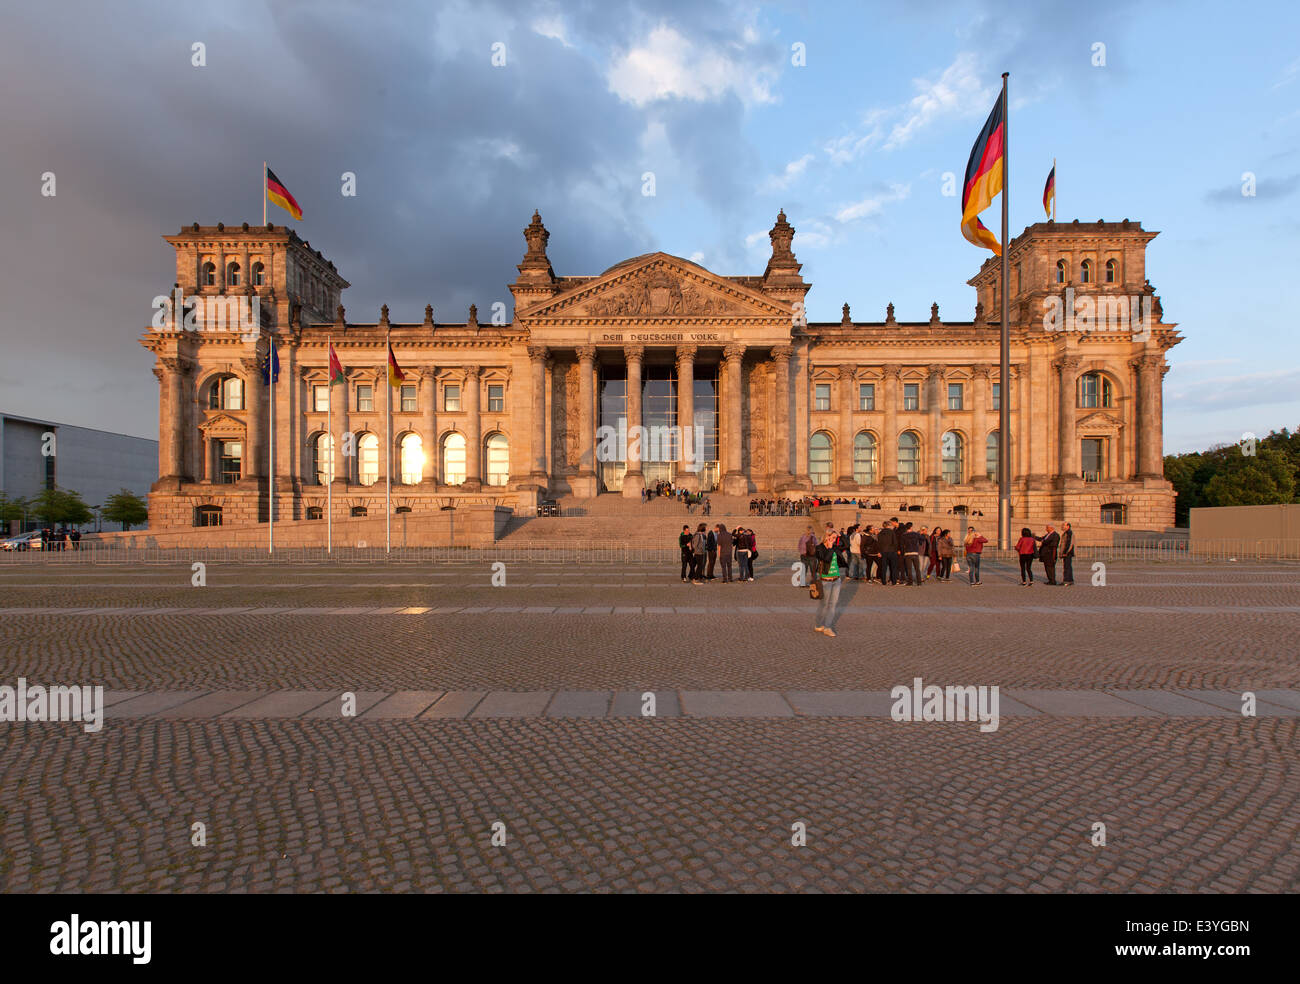 The Bundestag (German Federal Parliament) in the heart of Berlin. Stock Photo